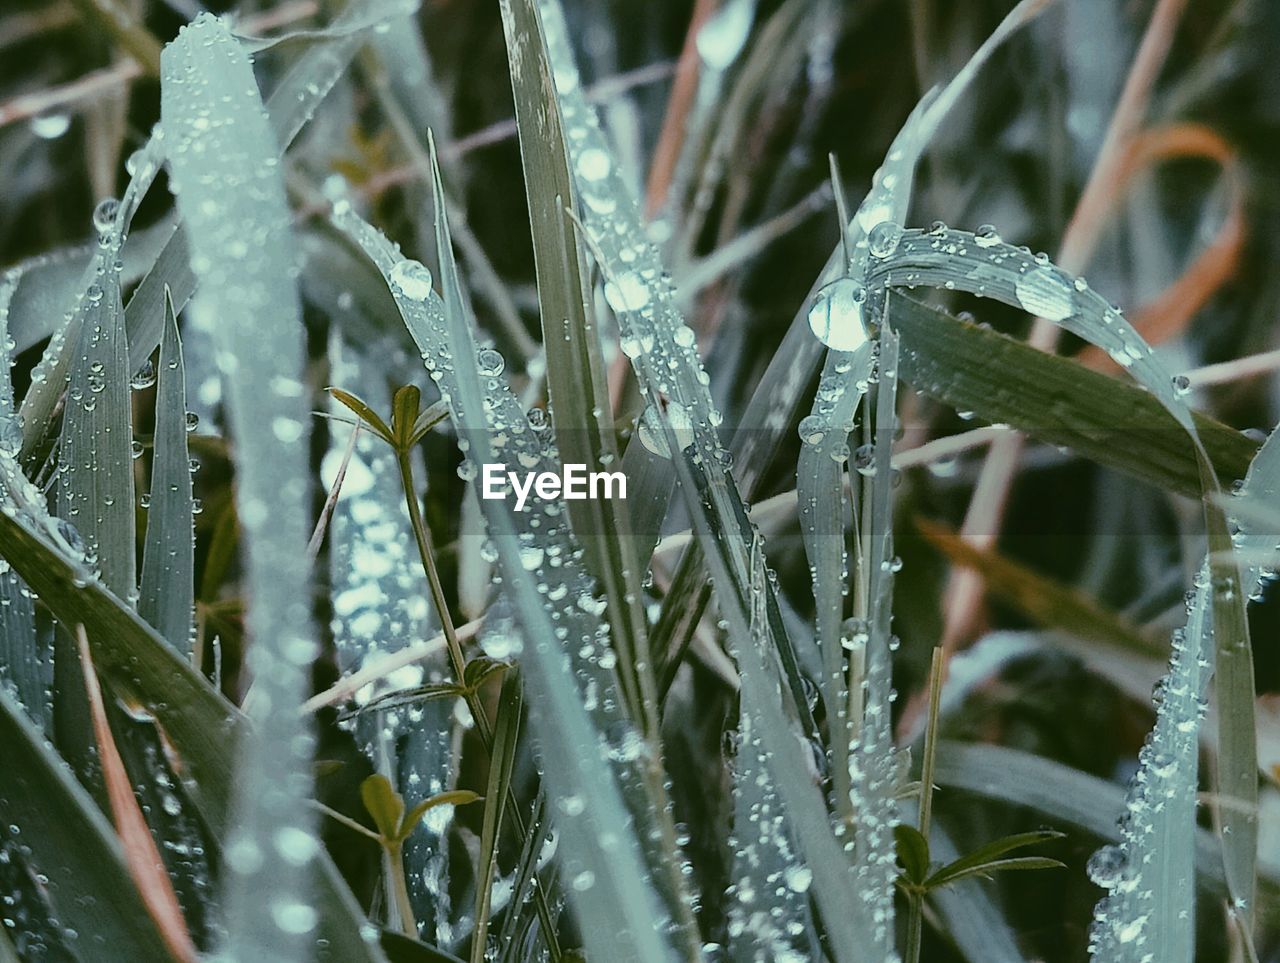 CLOSE-UP OF WET PLANTS DURING WINTER